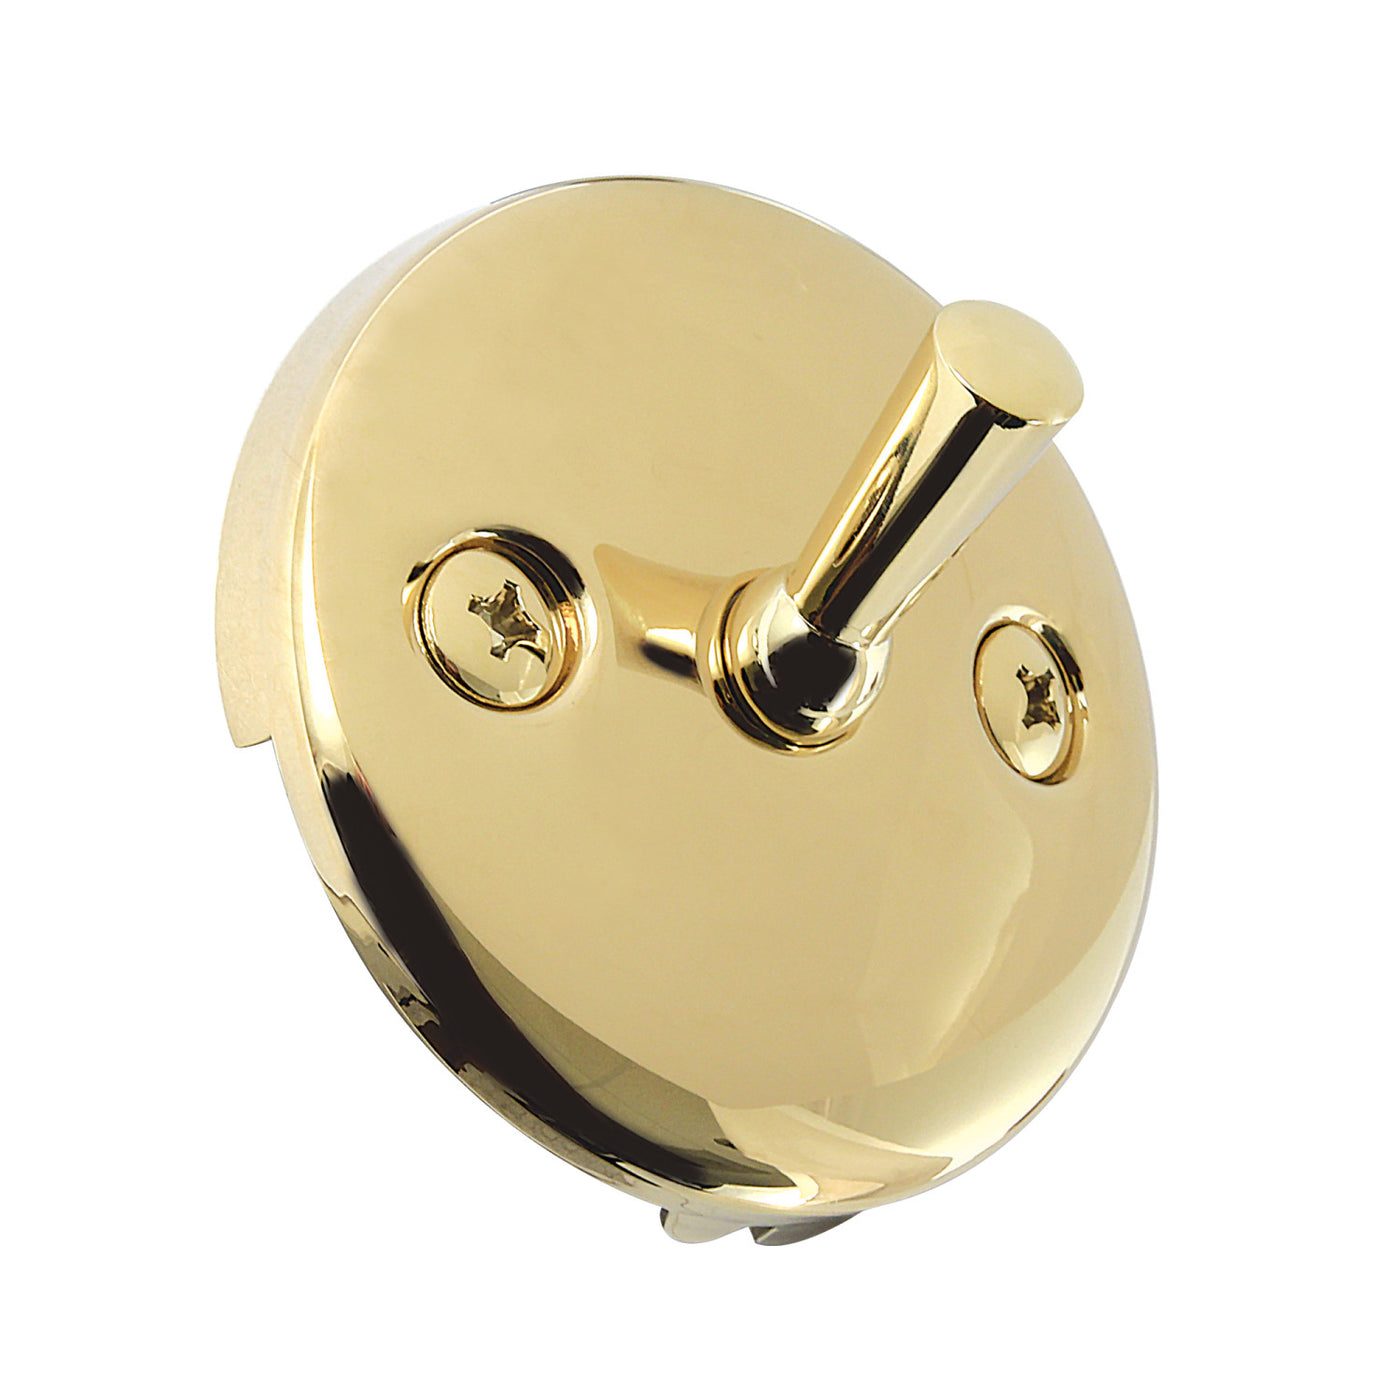 Elements of Design EDTL102 Round Overflow Plate with Trip Lever, Polished Brass